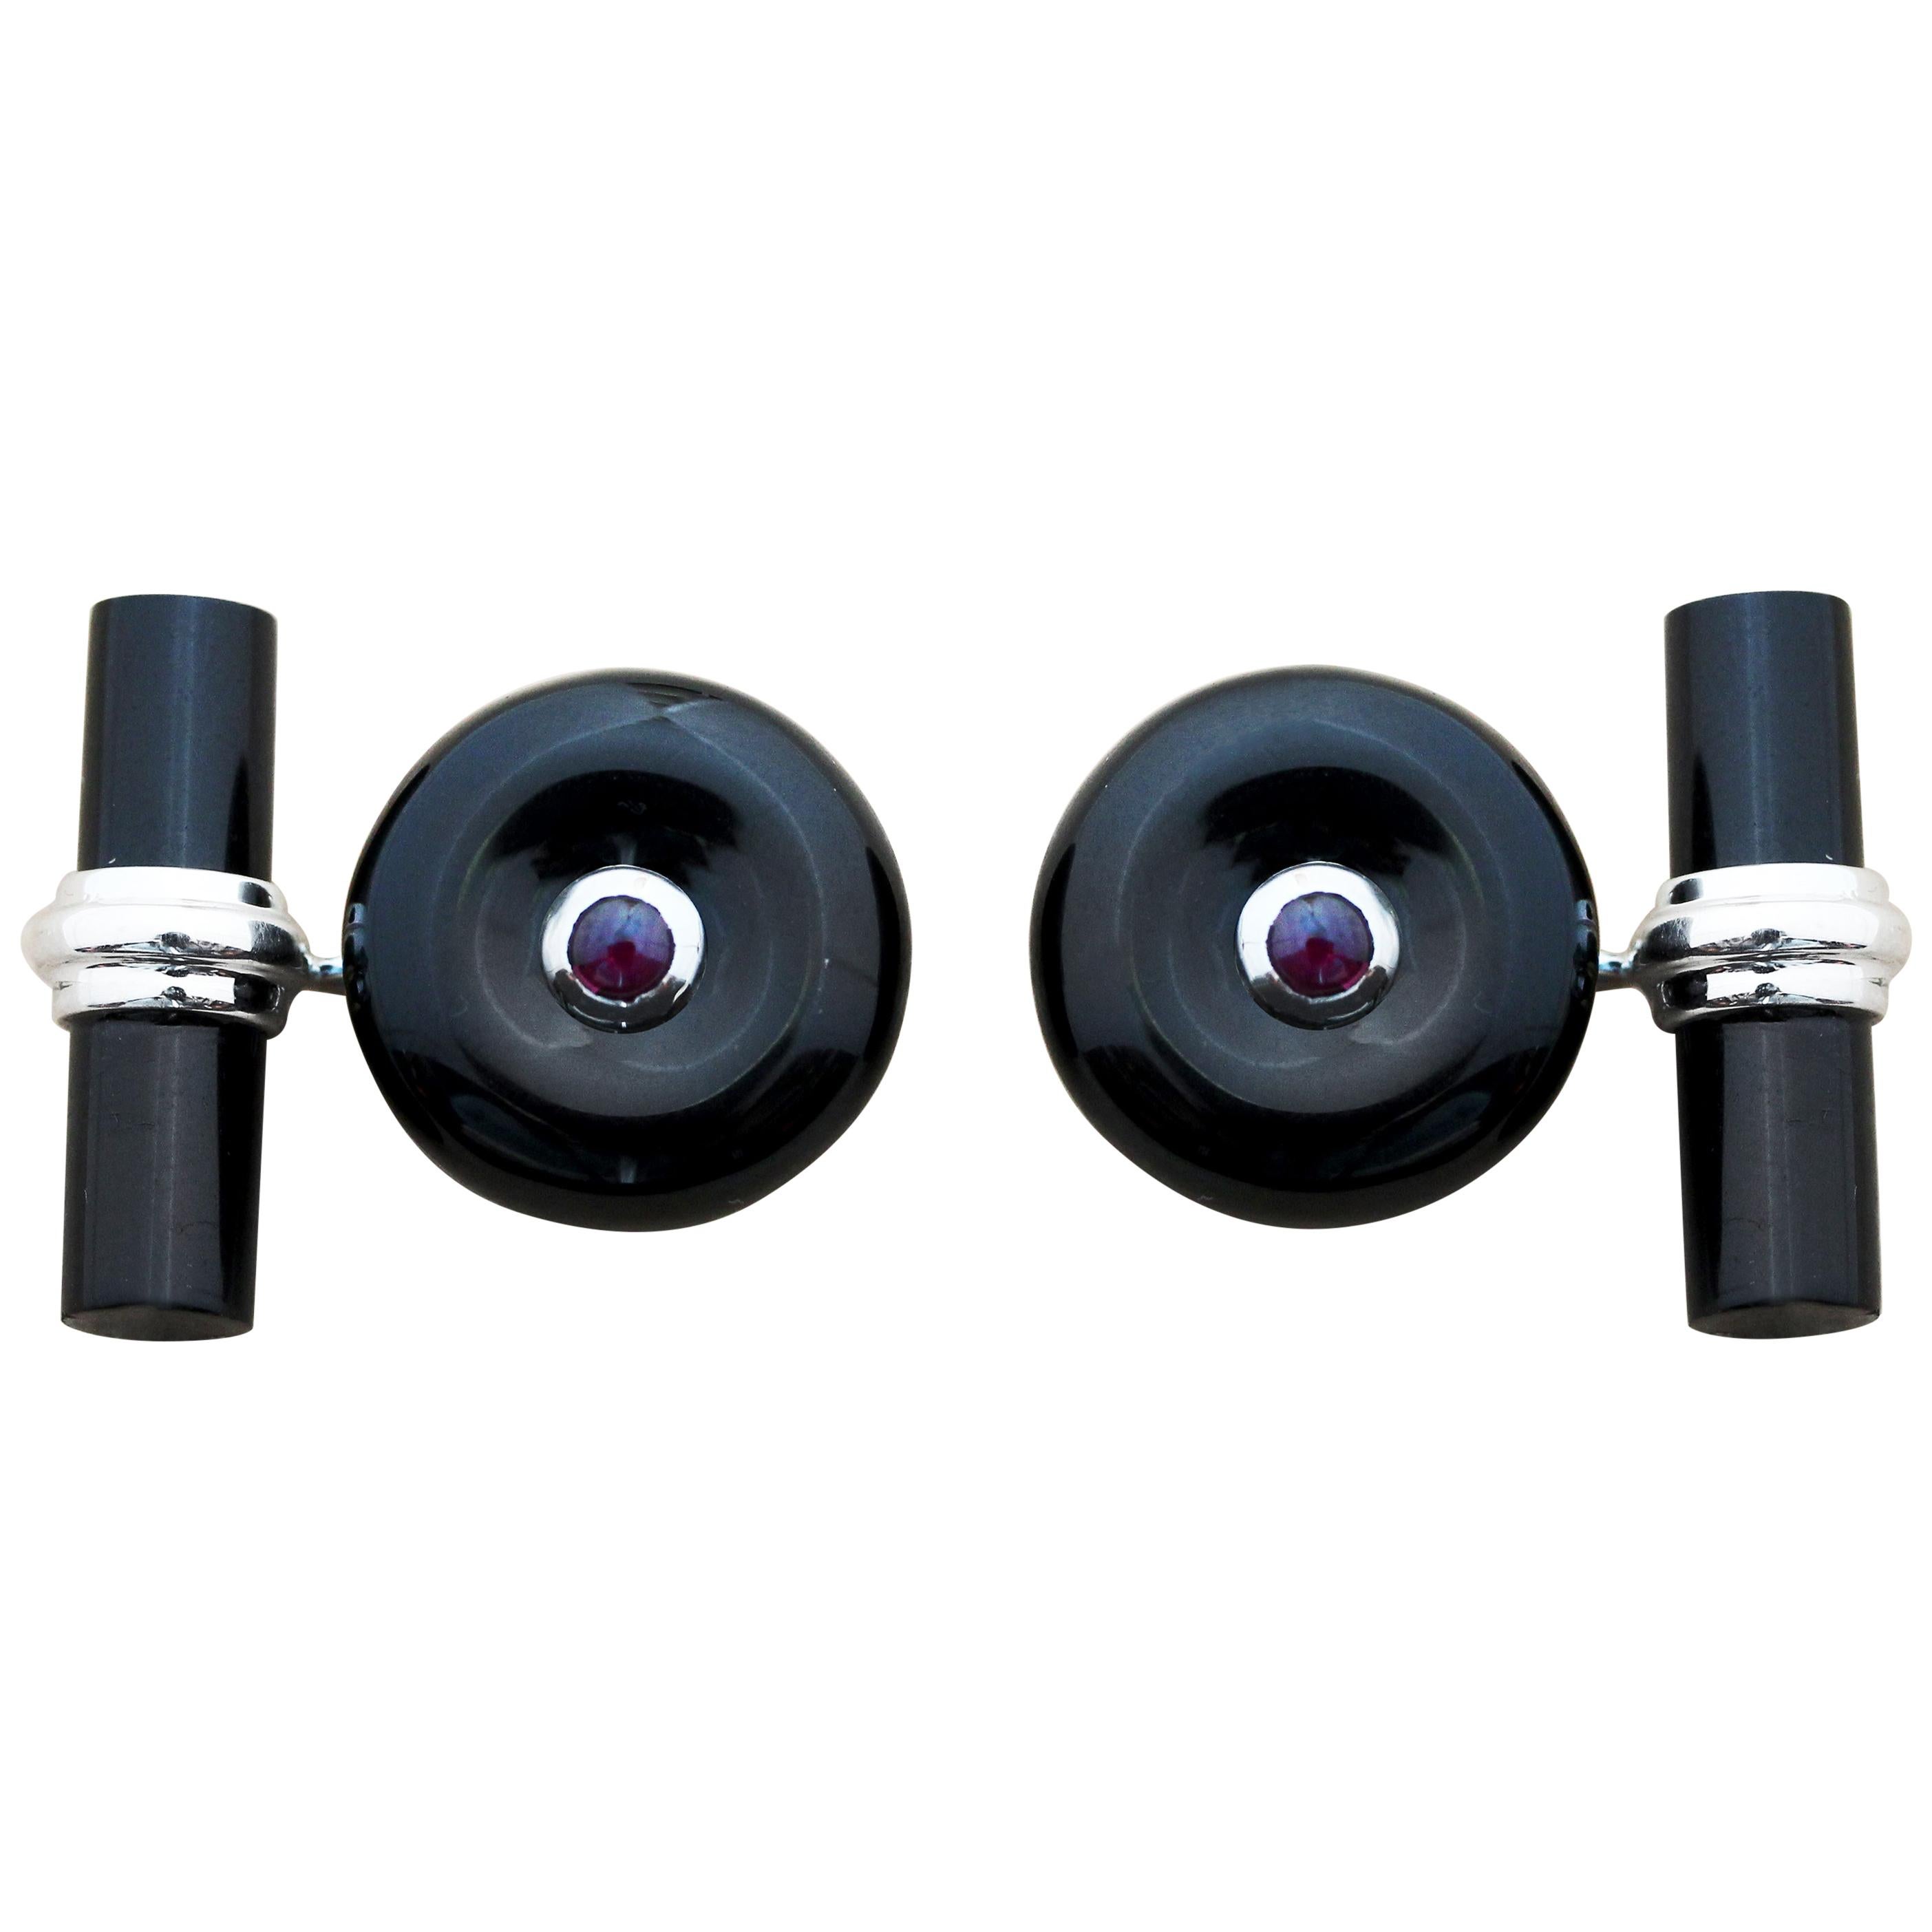 White Gold Cufflinks Onyx and Rubies with Cylindrical Onyx Toggle